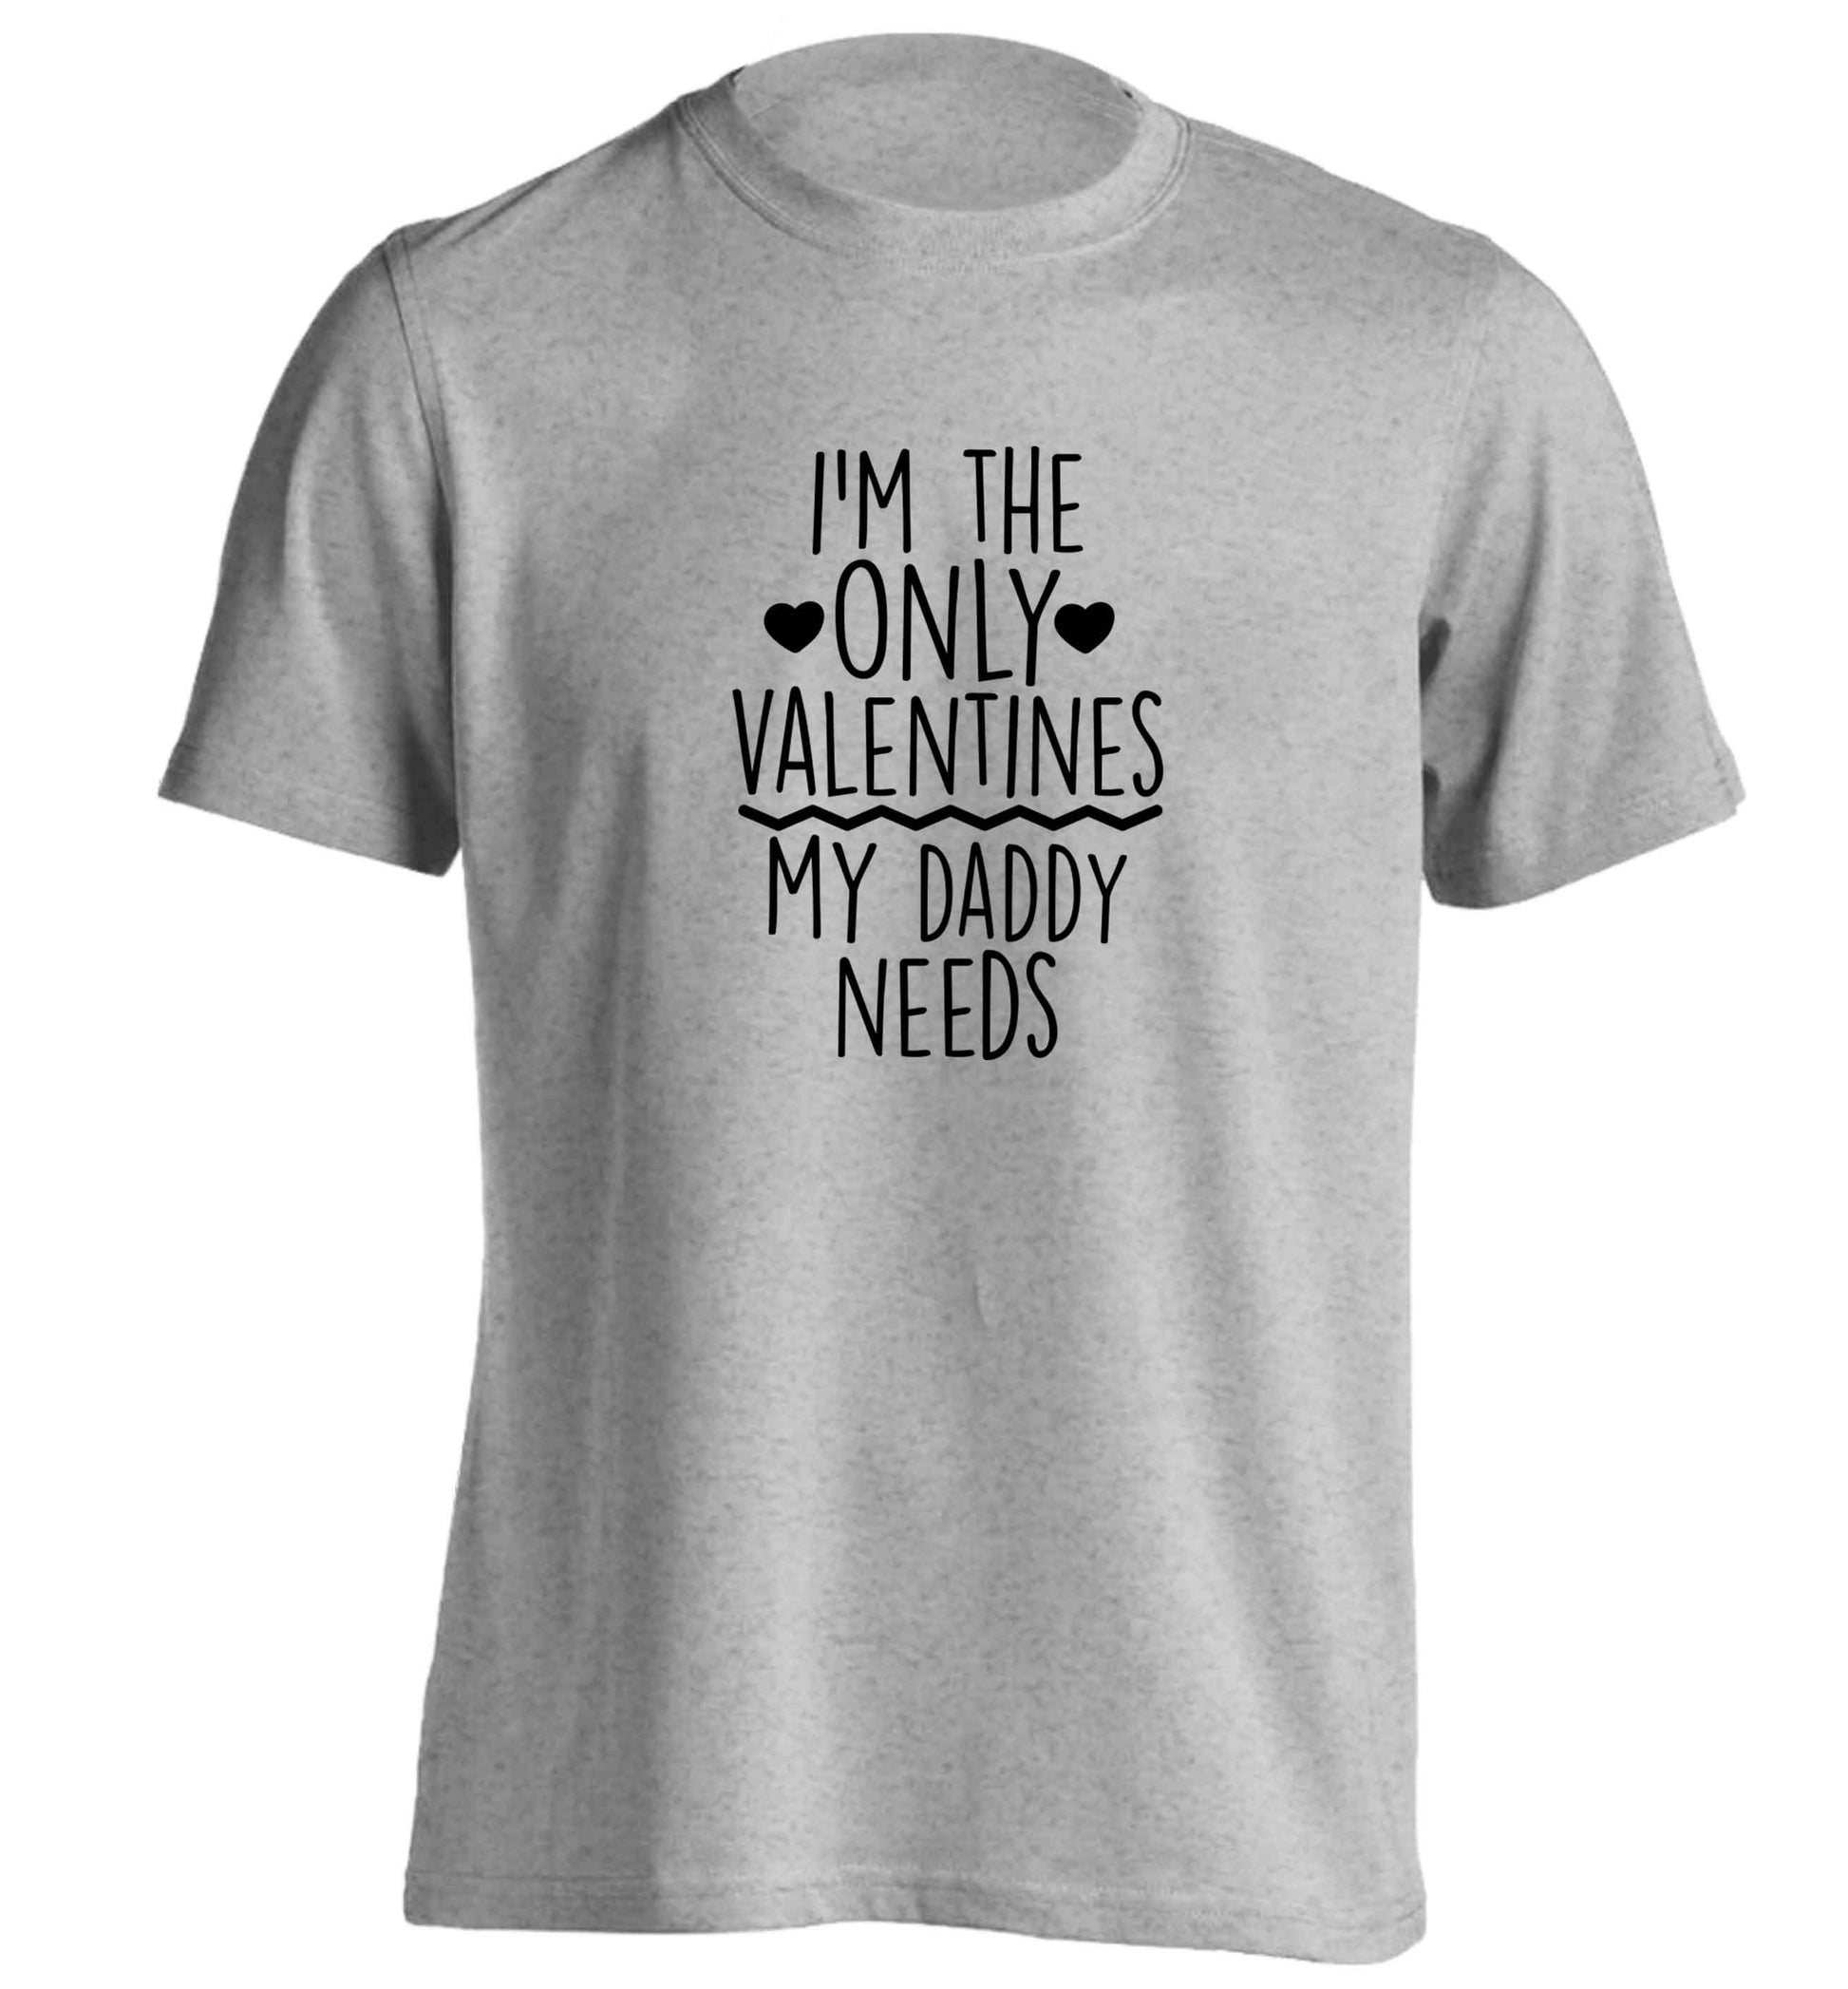 I'm the only valentines my daddy needs adults unisex grey Tshirt 2XL